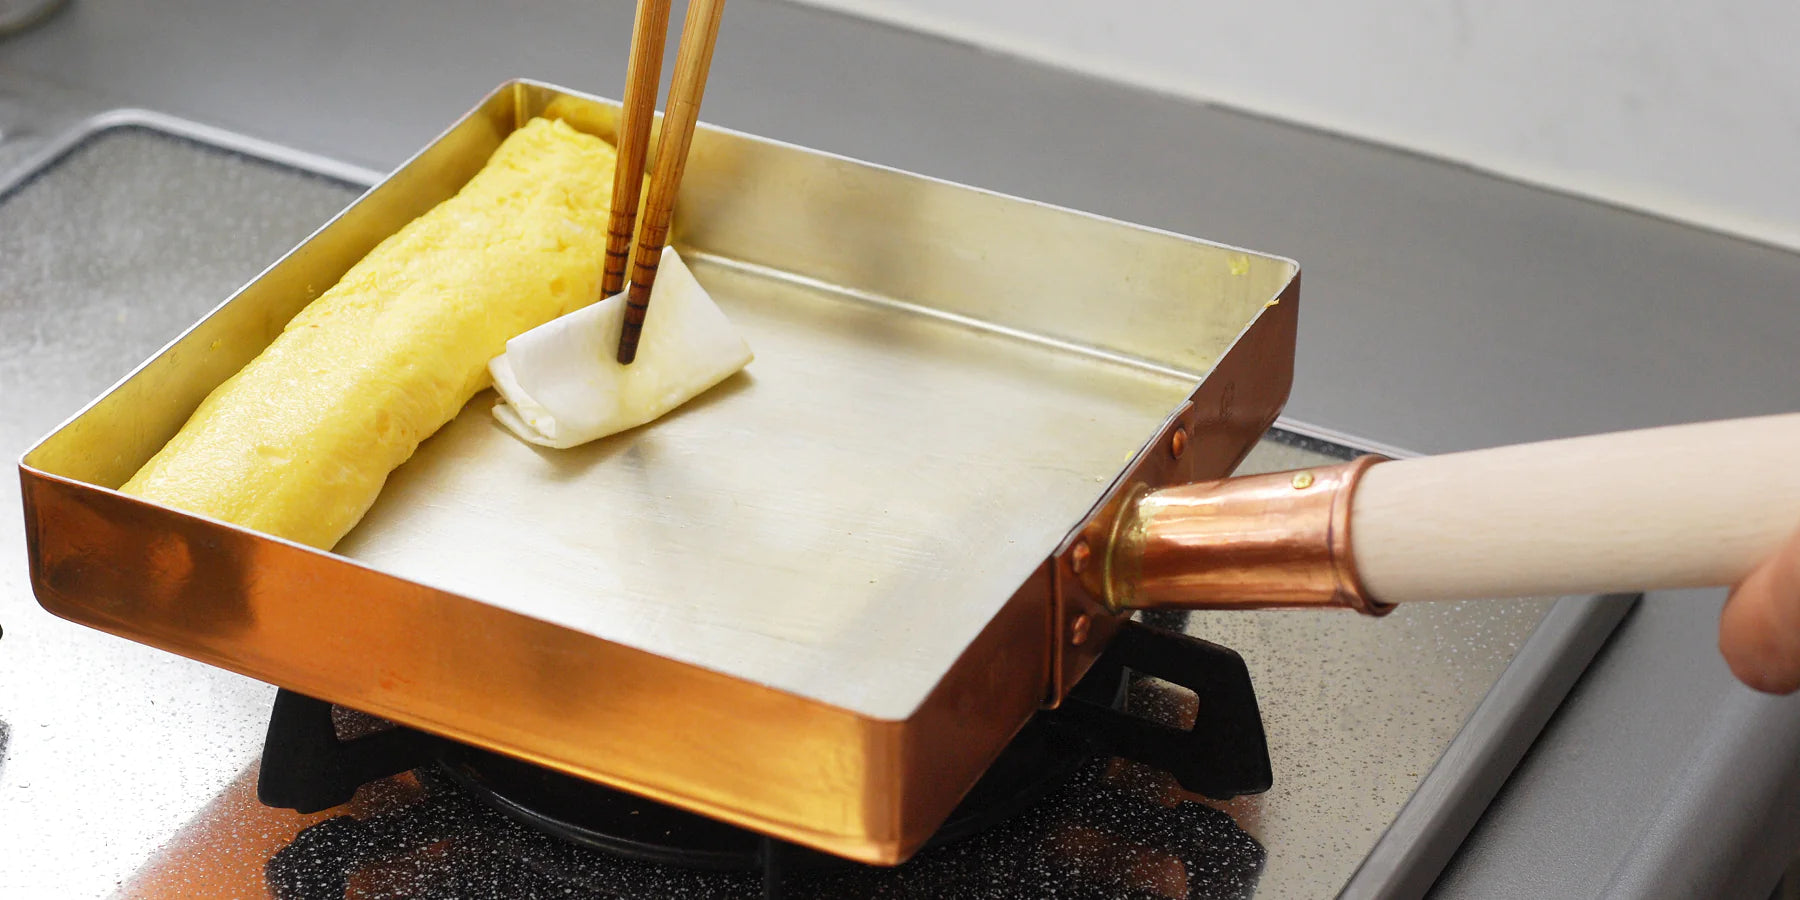 Discover our great selection of Tamagoyaki Omelette Pans at Globalkitchen Japan.